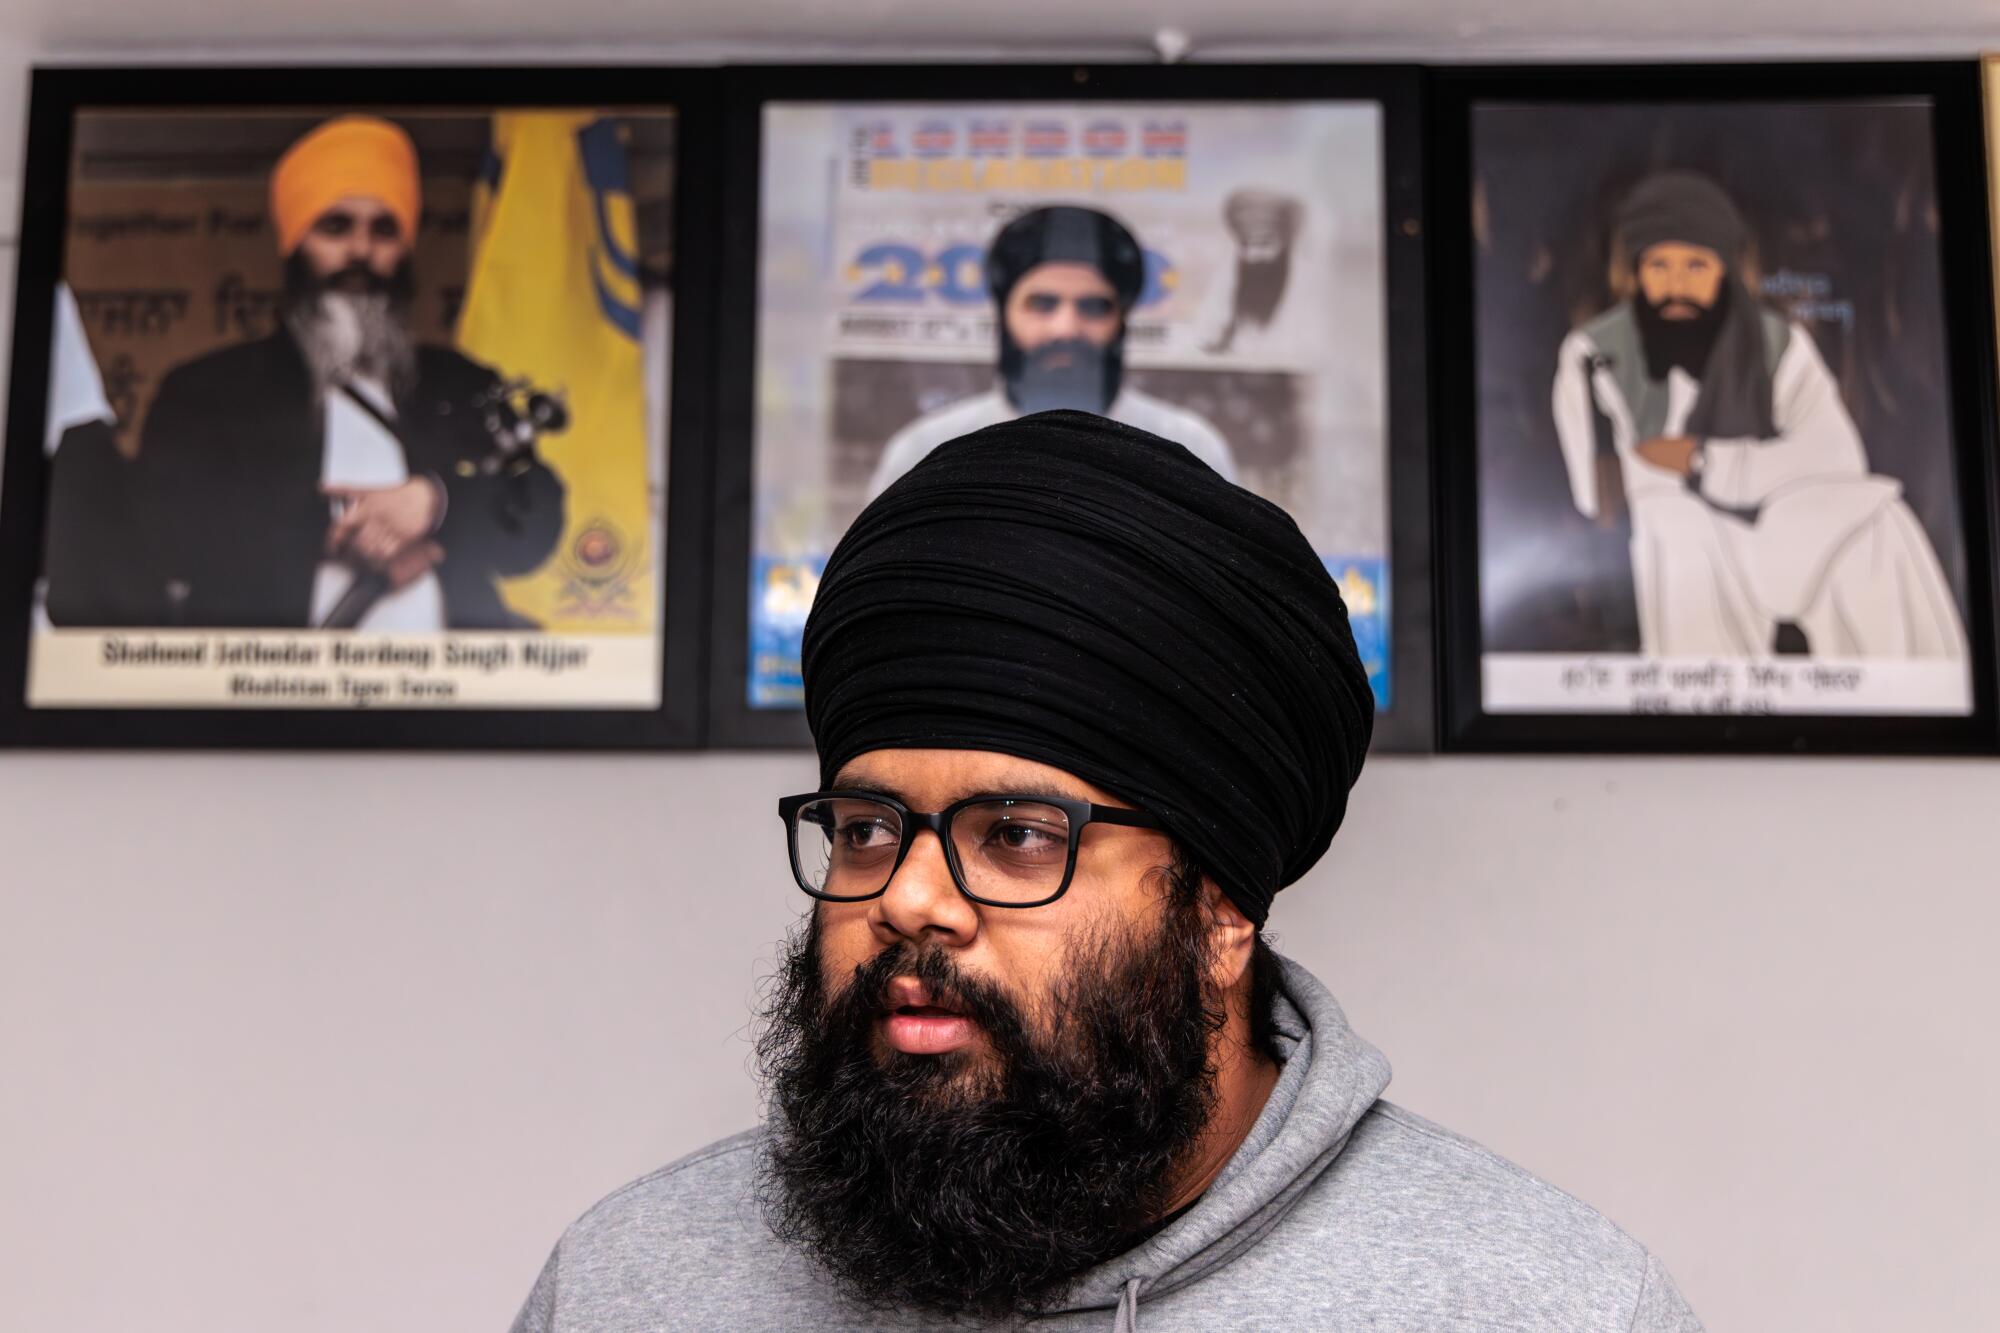  A man with a dark beard, glasses and a dark turban is shown with portraits of three turbaned men behind him